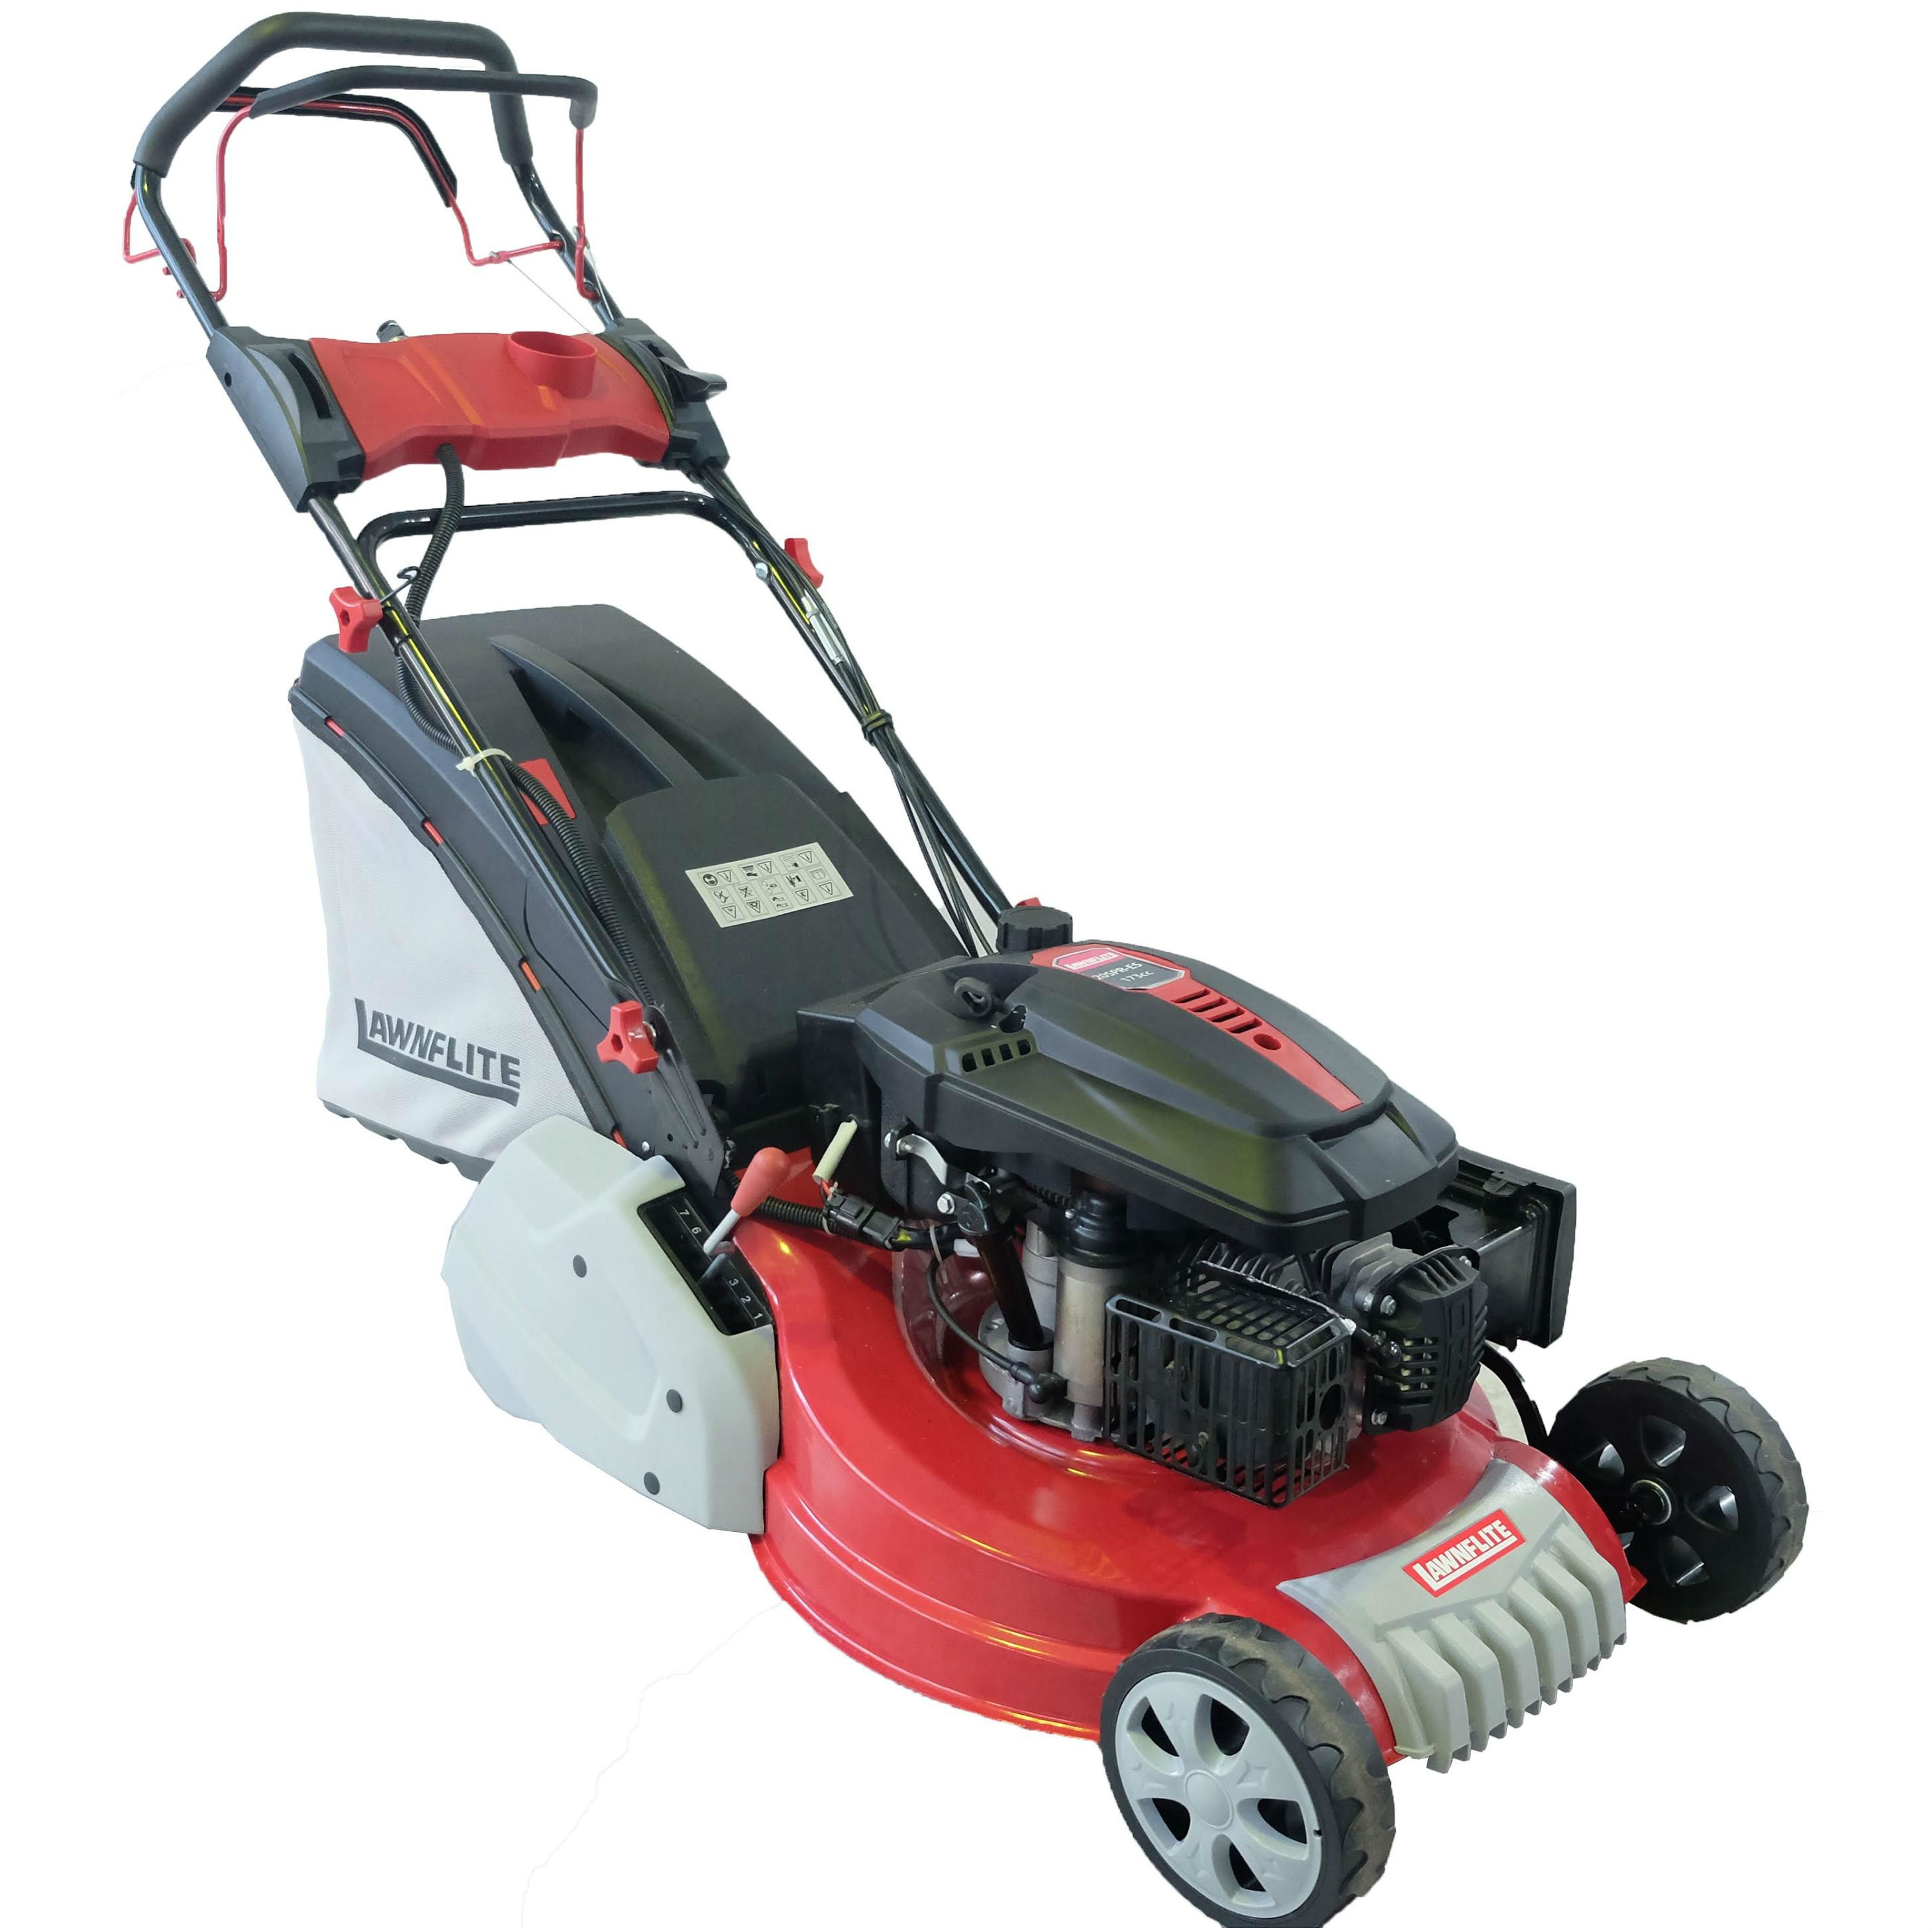 Lawnflite 20SPR ES Self Propelled Petrol Rear Roller Lawnmower with Electric Start